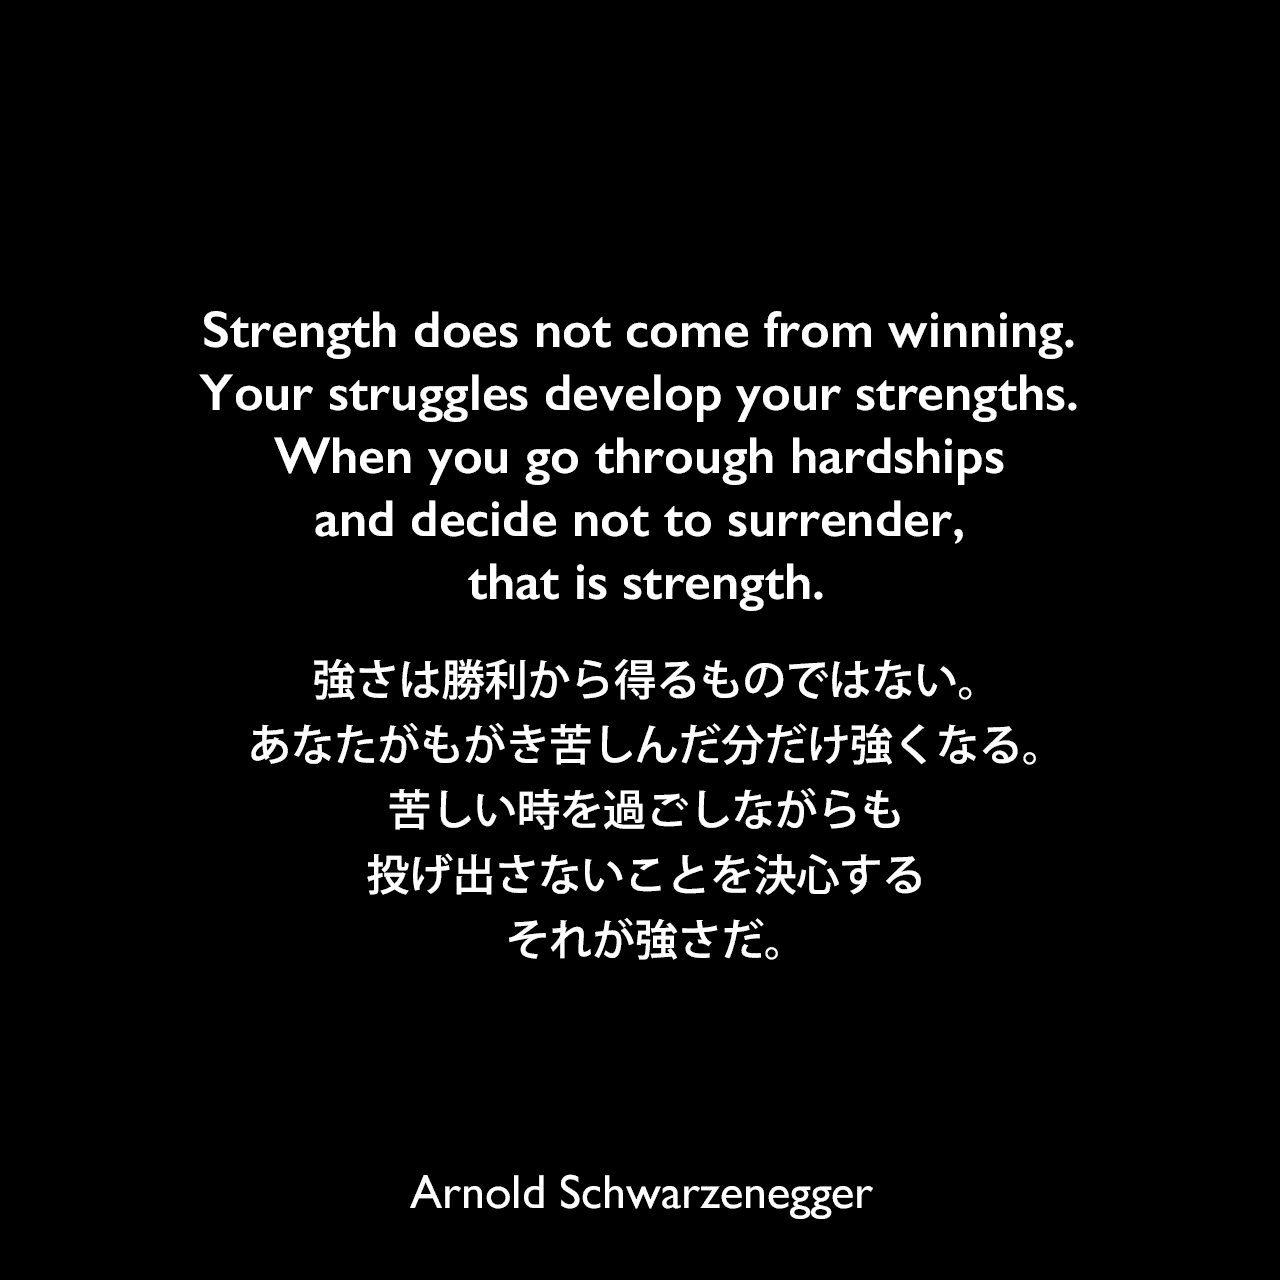 Strength does not come from winning. Your struggles develop your strengths. When you go through hardships and decide not to surrender, that is strength.強さは勝利から得るものではない。あなたがもがき苦しんだ分だけ強くなる。苦しい時を過ごしながらも投げ出さないことを決心する、それが強さだ。